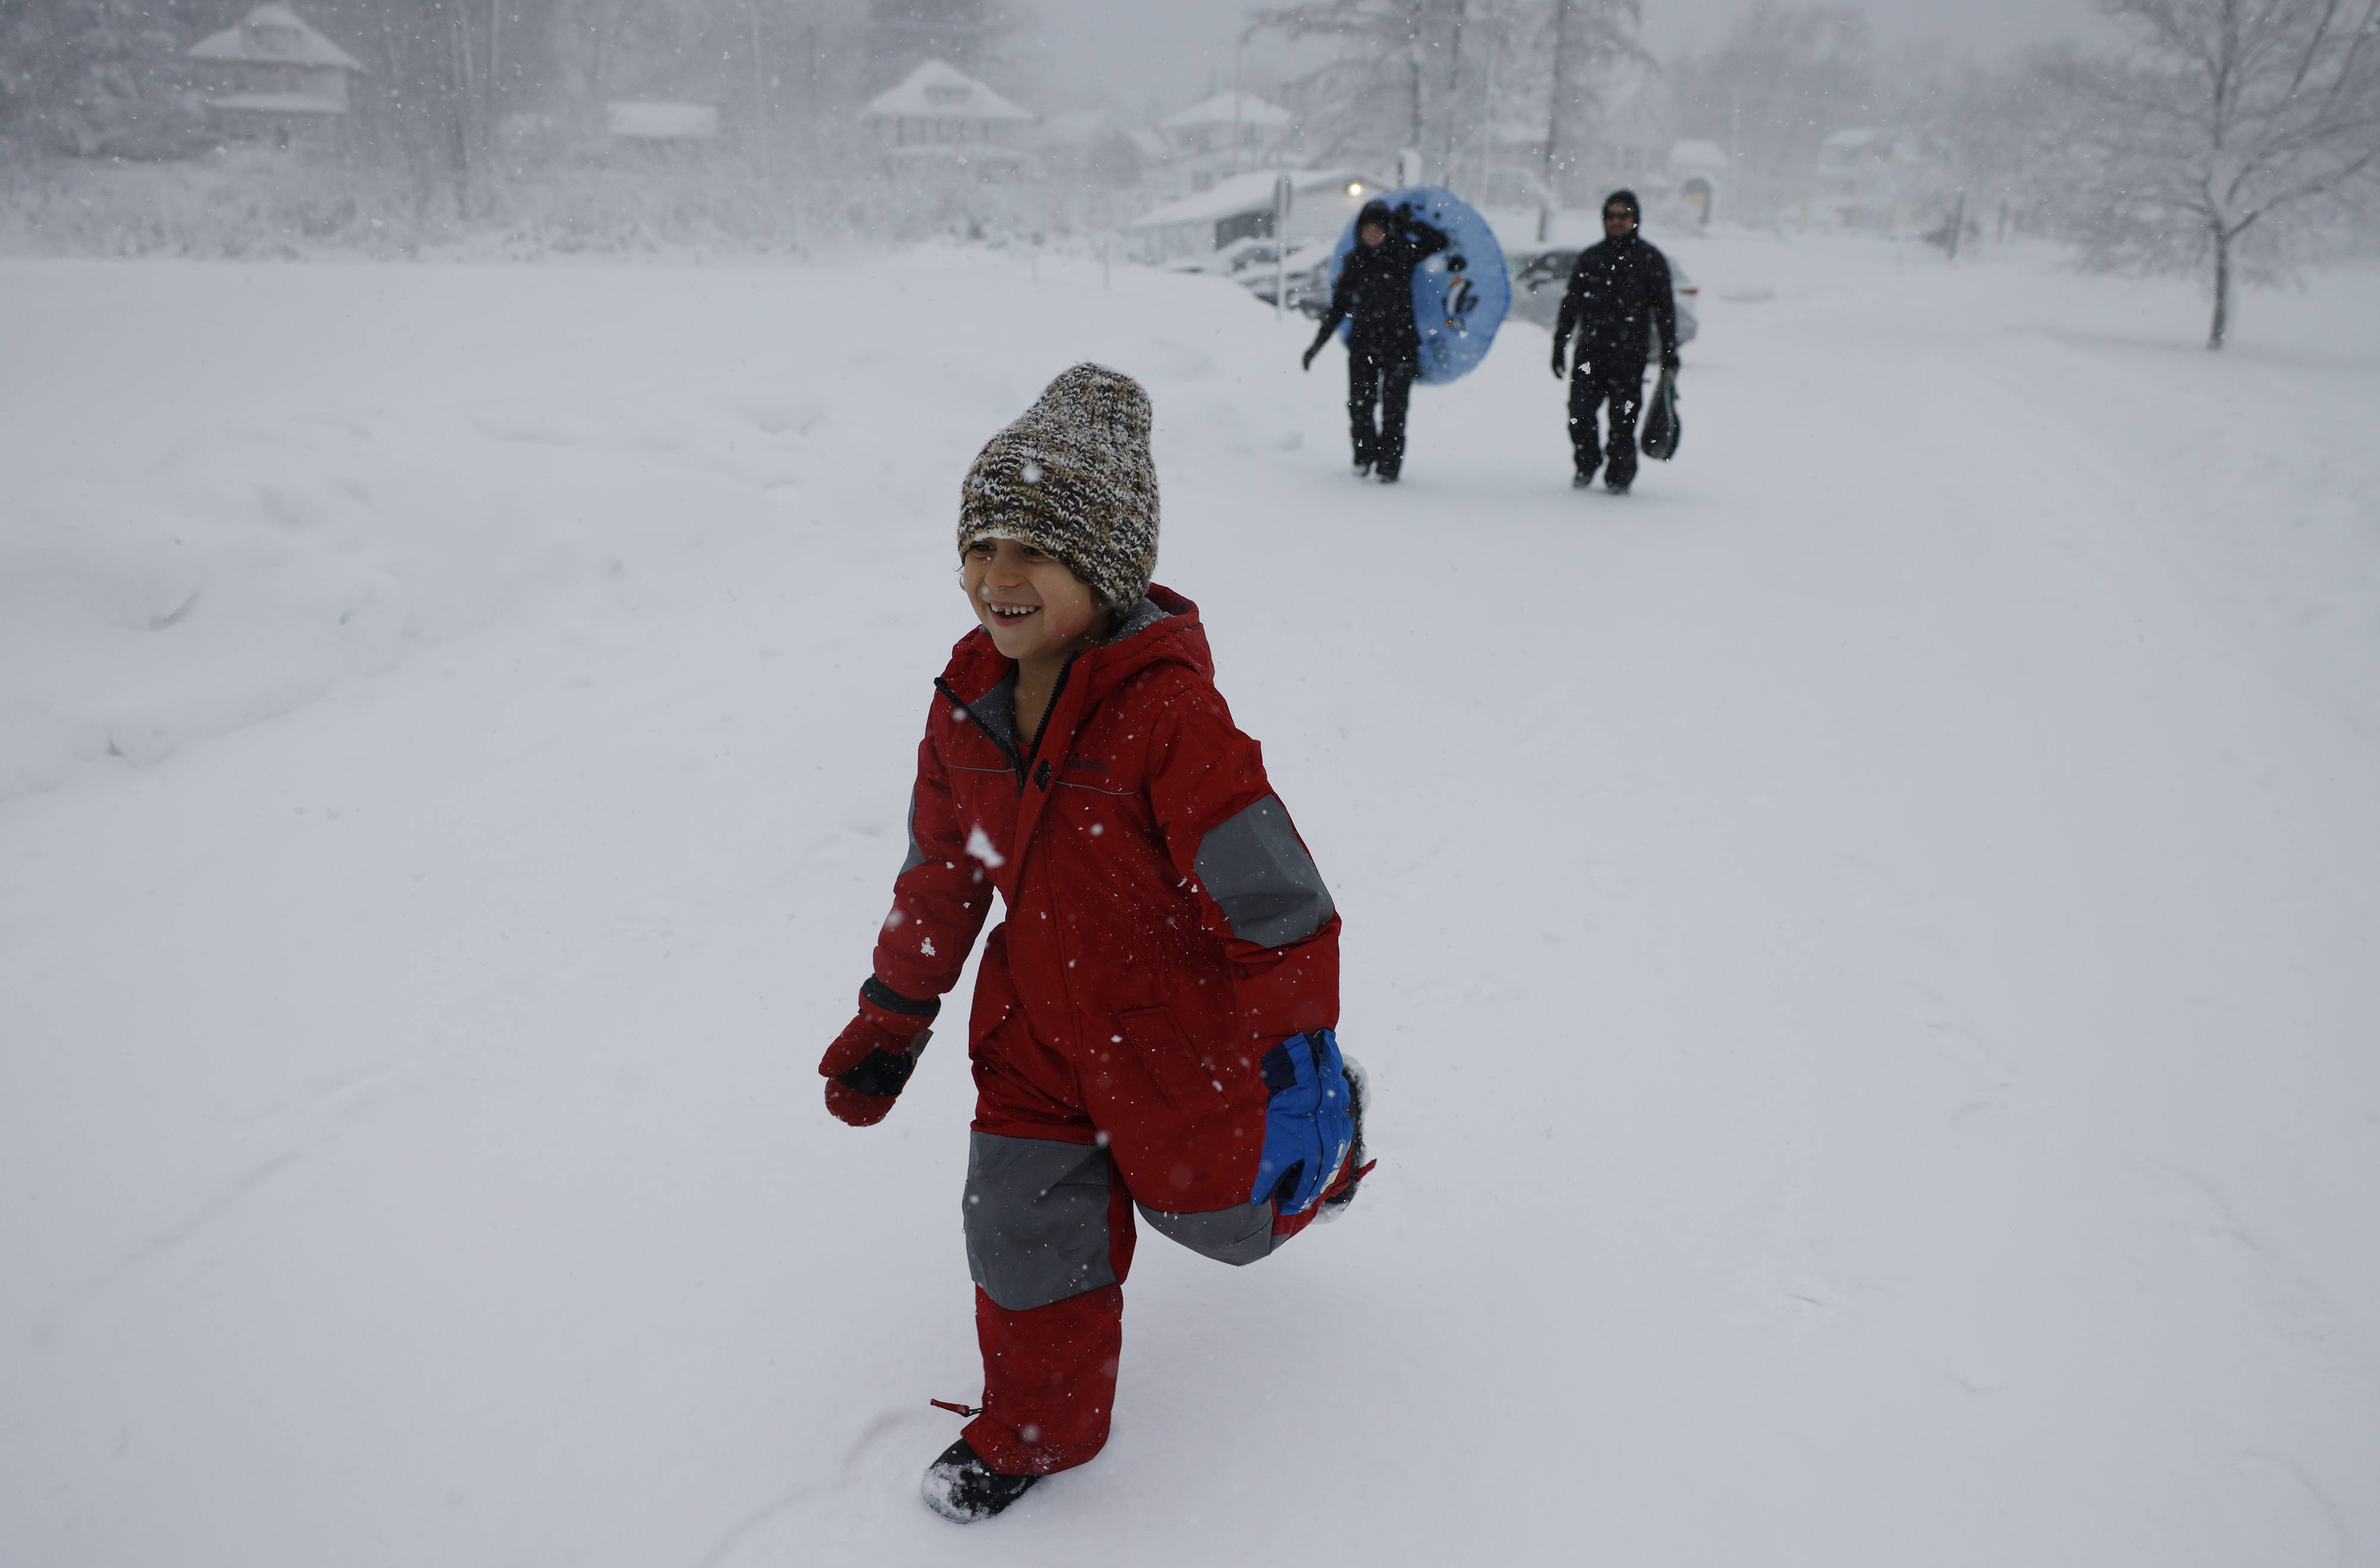 See snow photos and videos from New England winter storm